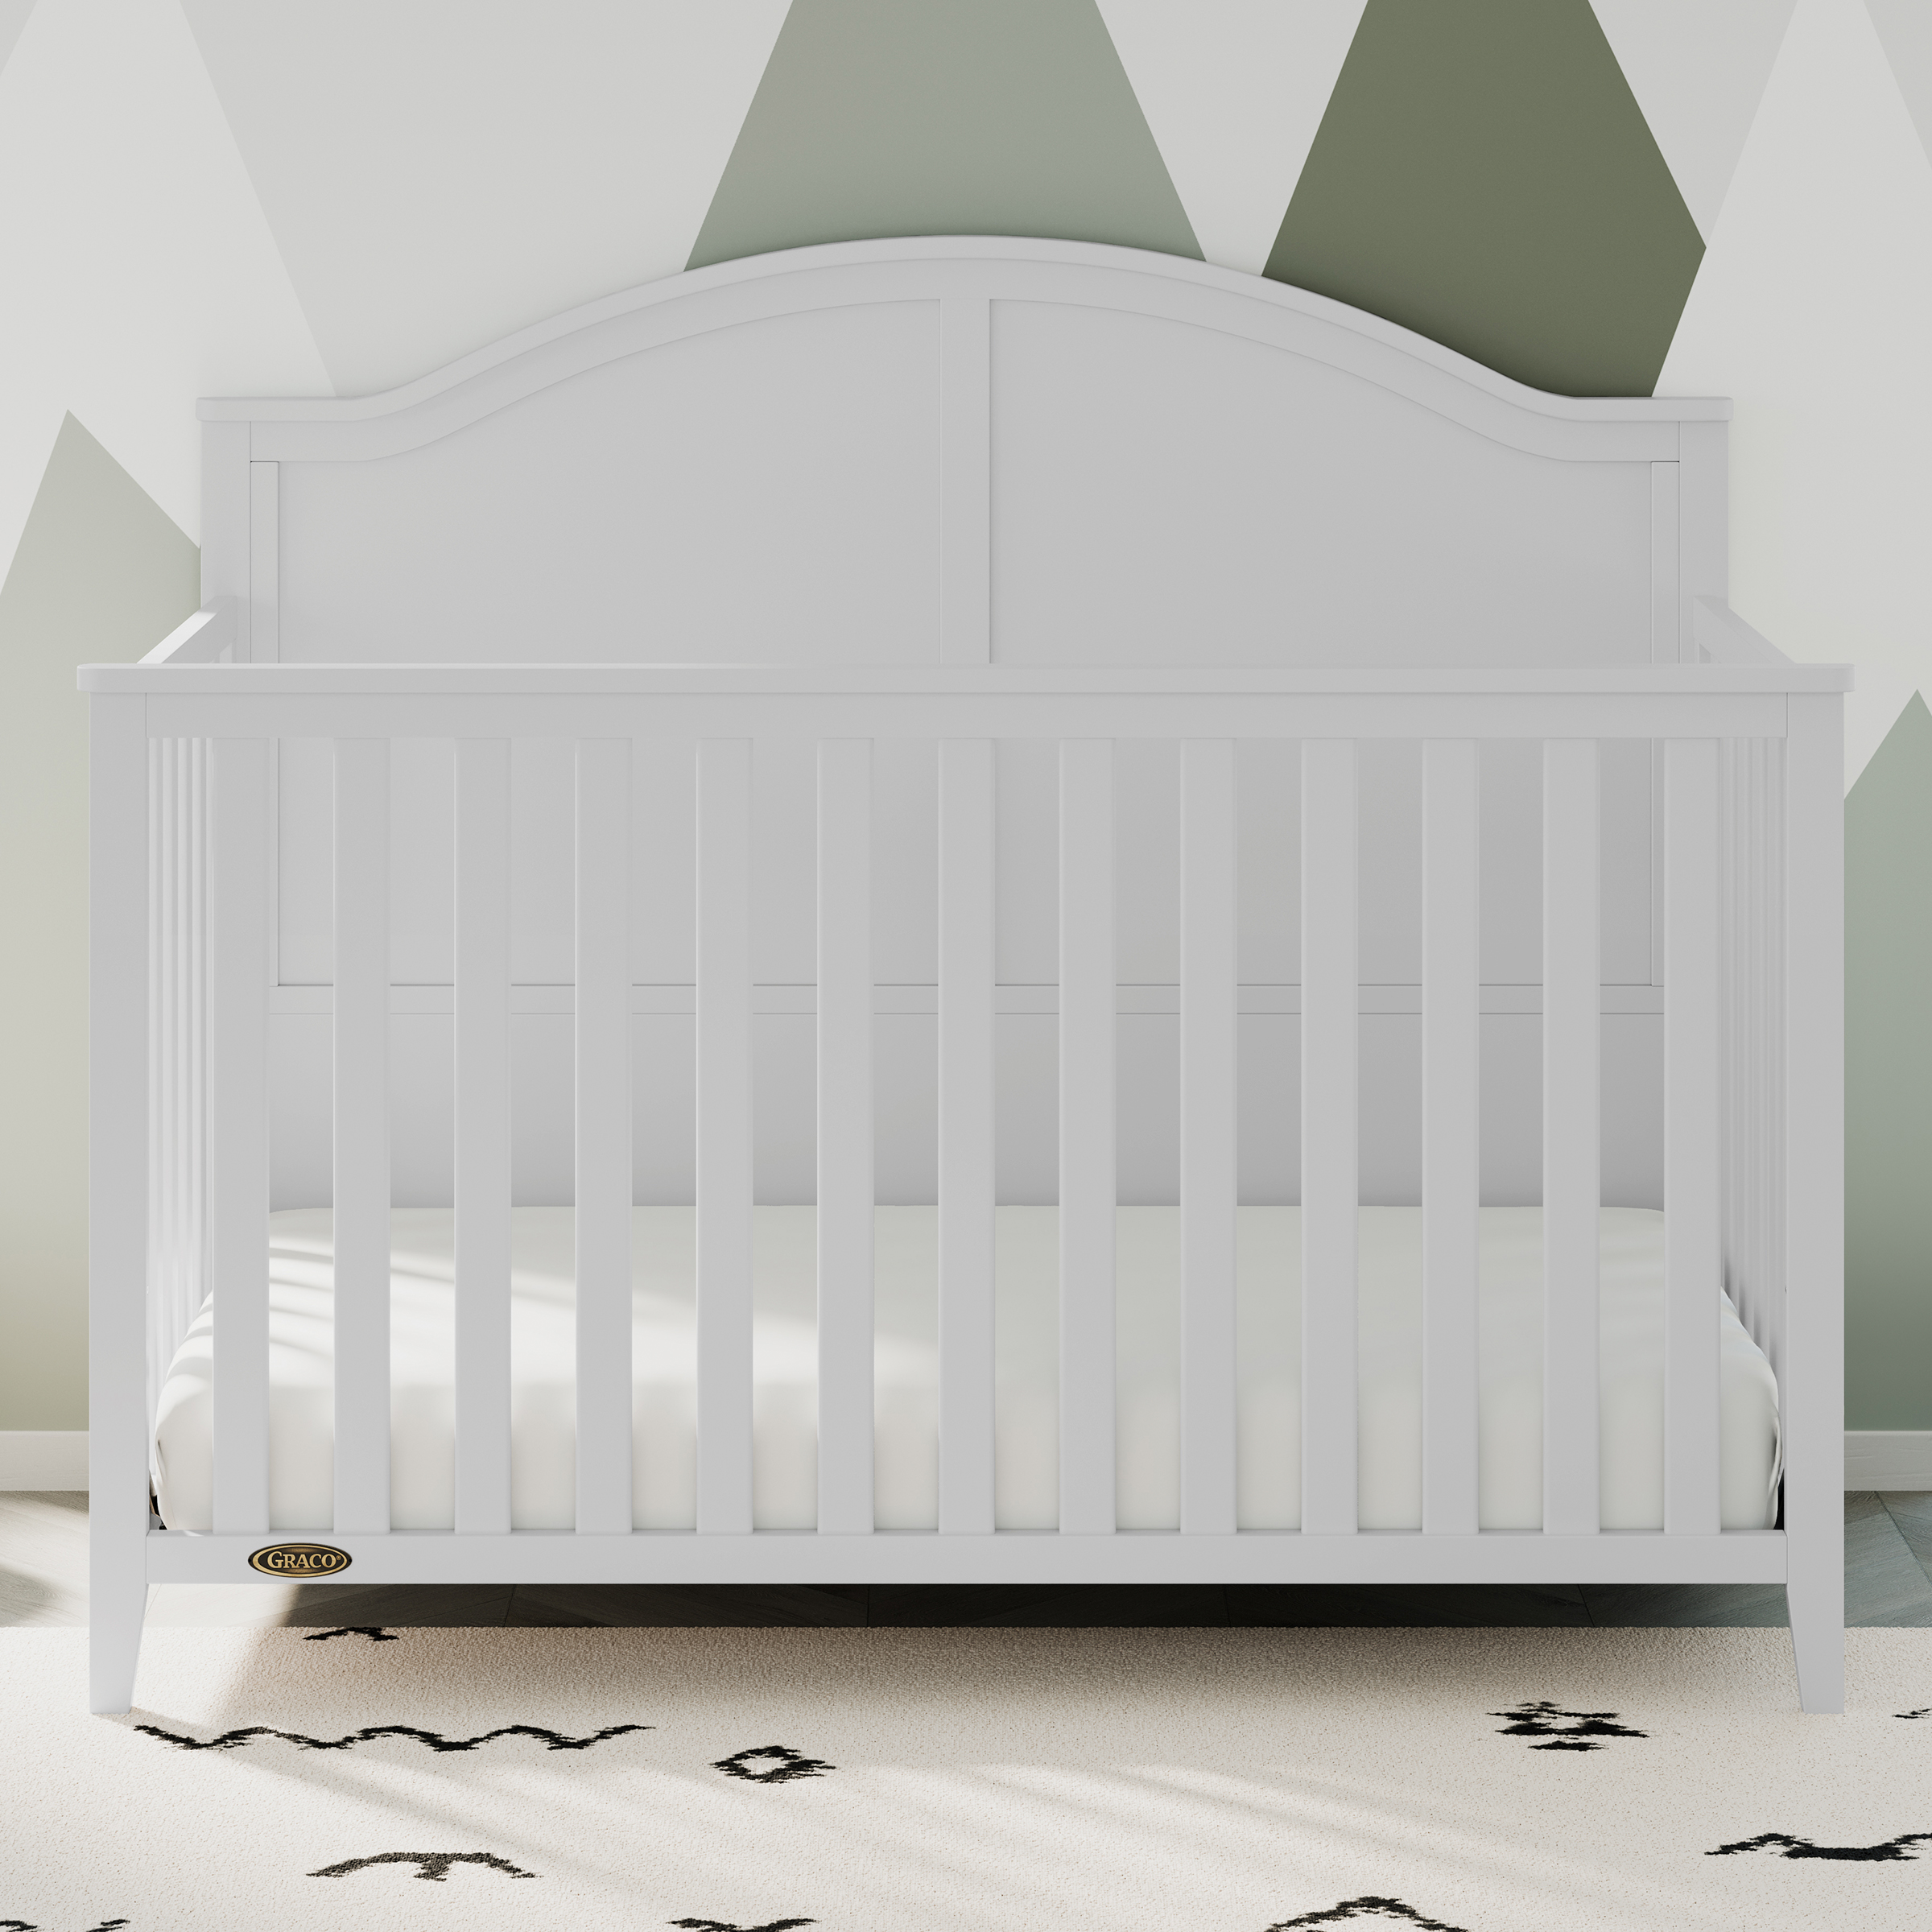 Graco Wilfred 5-in-1 Convertible Baby Crib, White - image 3 of 12